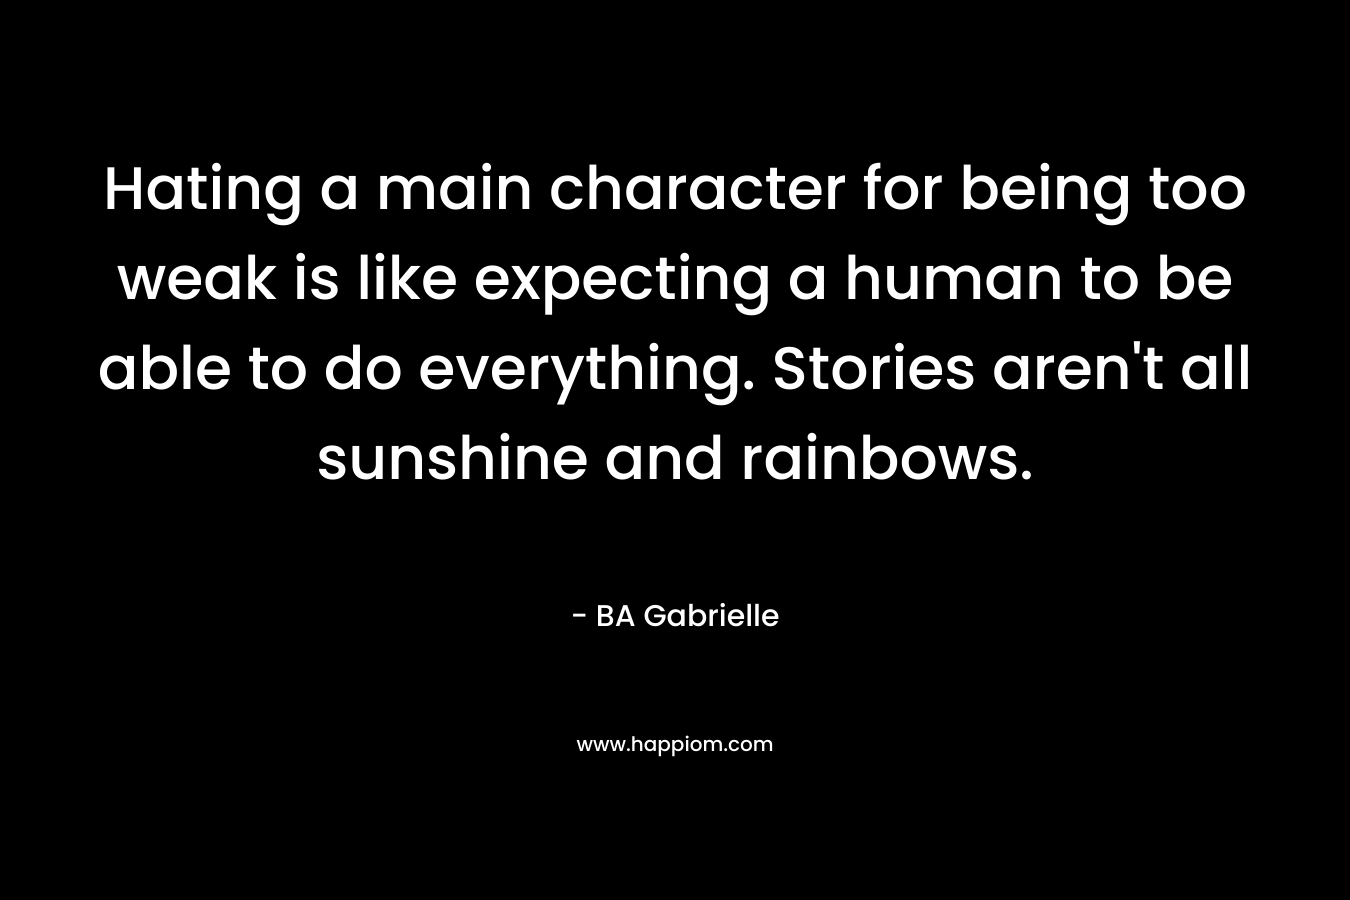 Hating a main character for being too weak is like expecting a human to be able to do everything. Stories aren't all sunshine and rainbows.